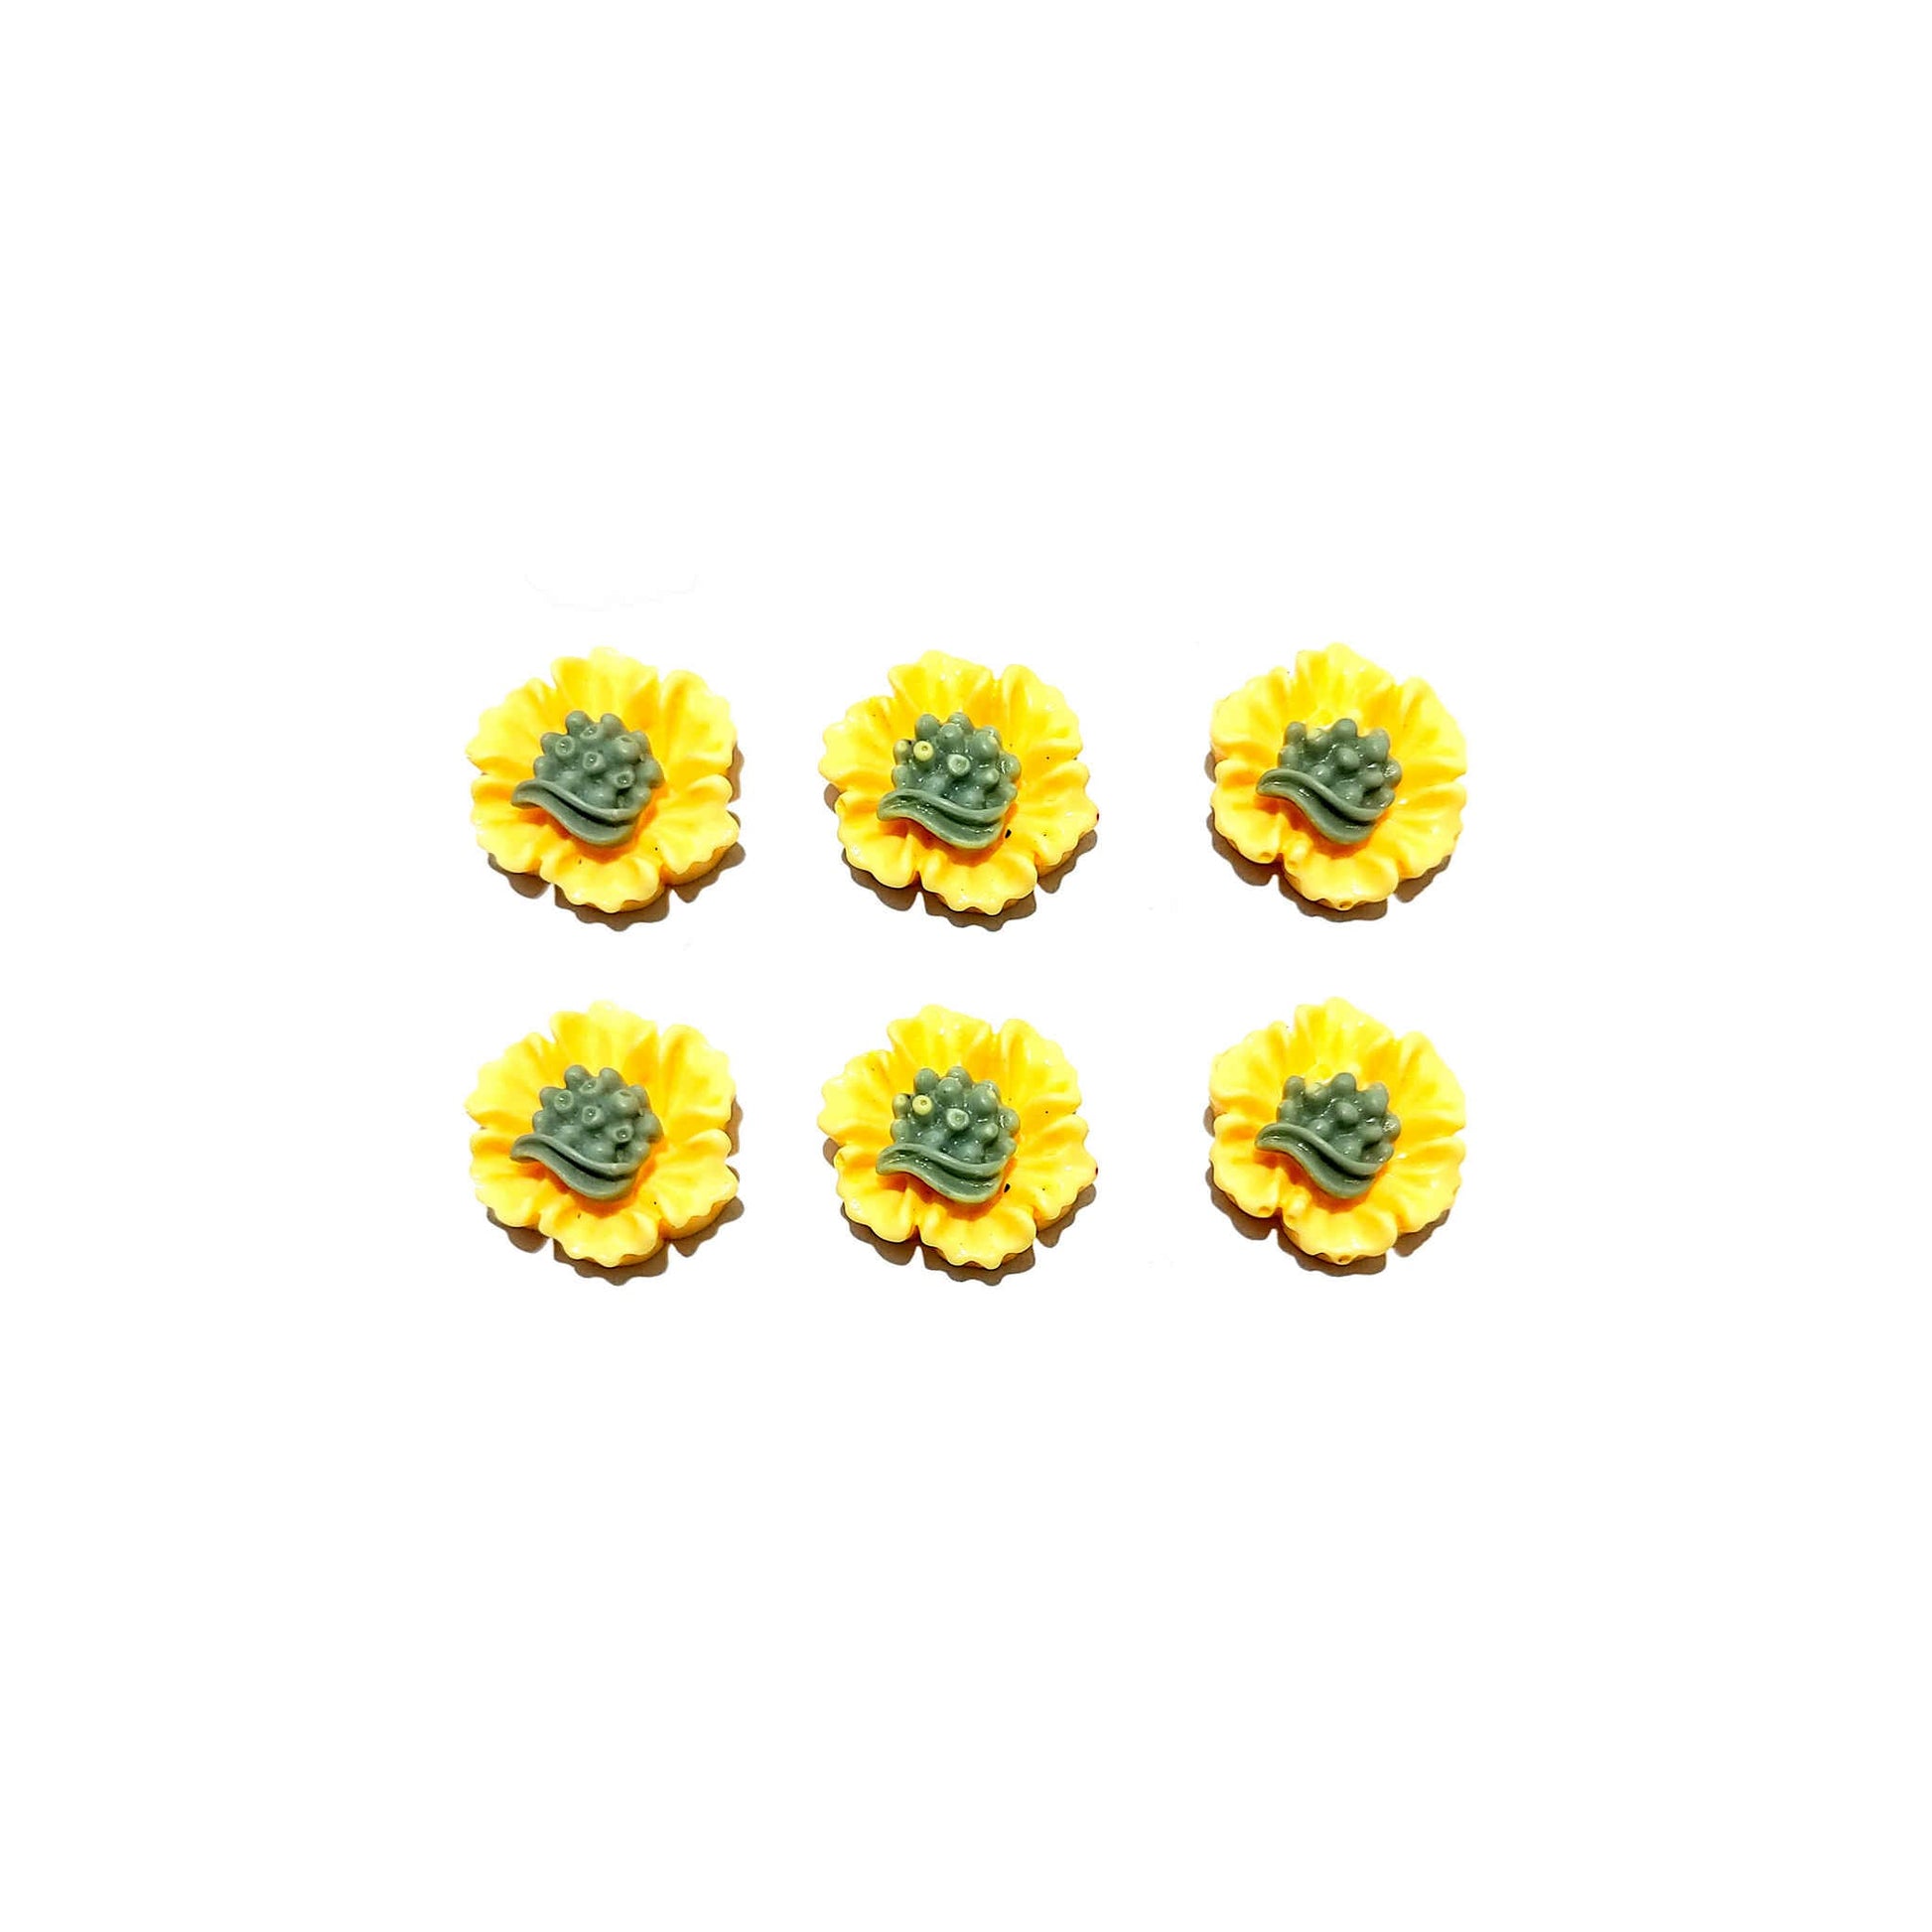 Indian Petals Flat Base Beautiful Floral 3D Cabochons for Craft Trousseau Packing or Decoration - Design 422, Style - Classic, Yellow